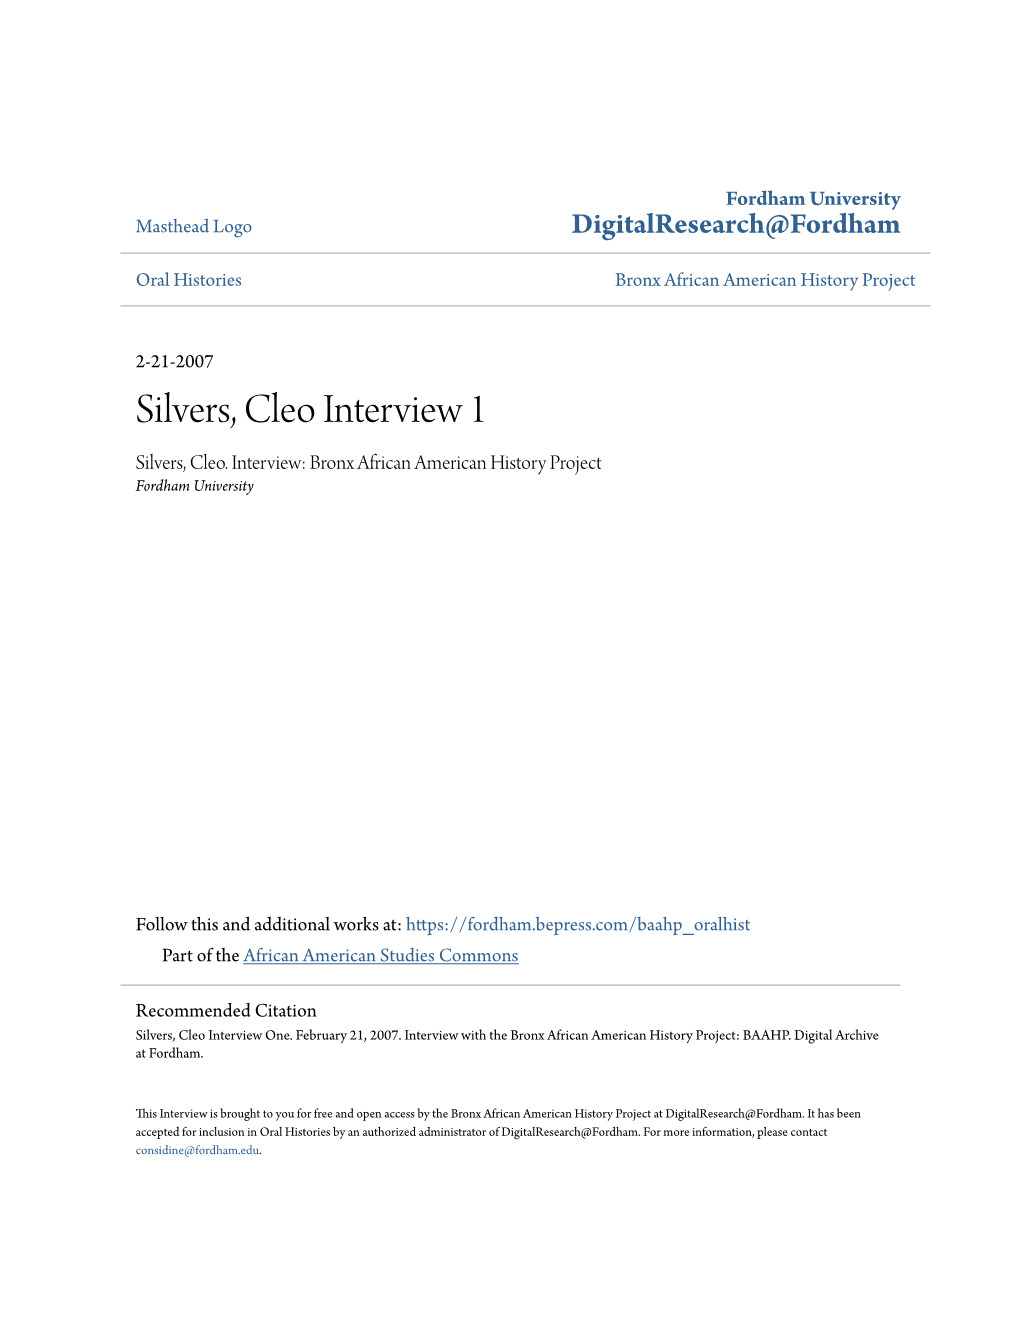 Silvers, Cleo Interview 1 Silvers, Cleo